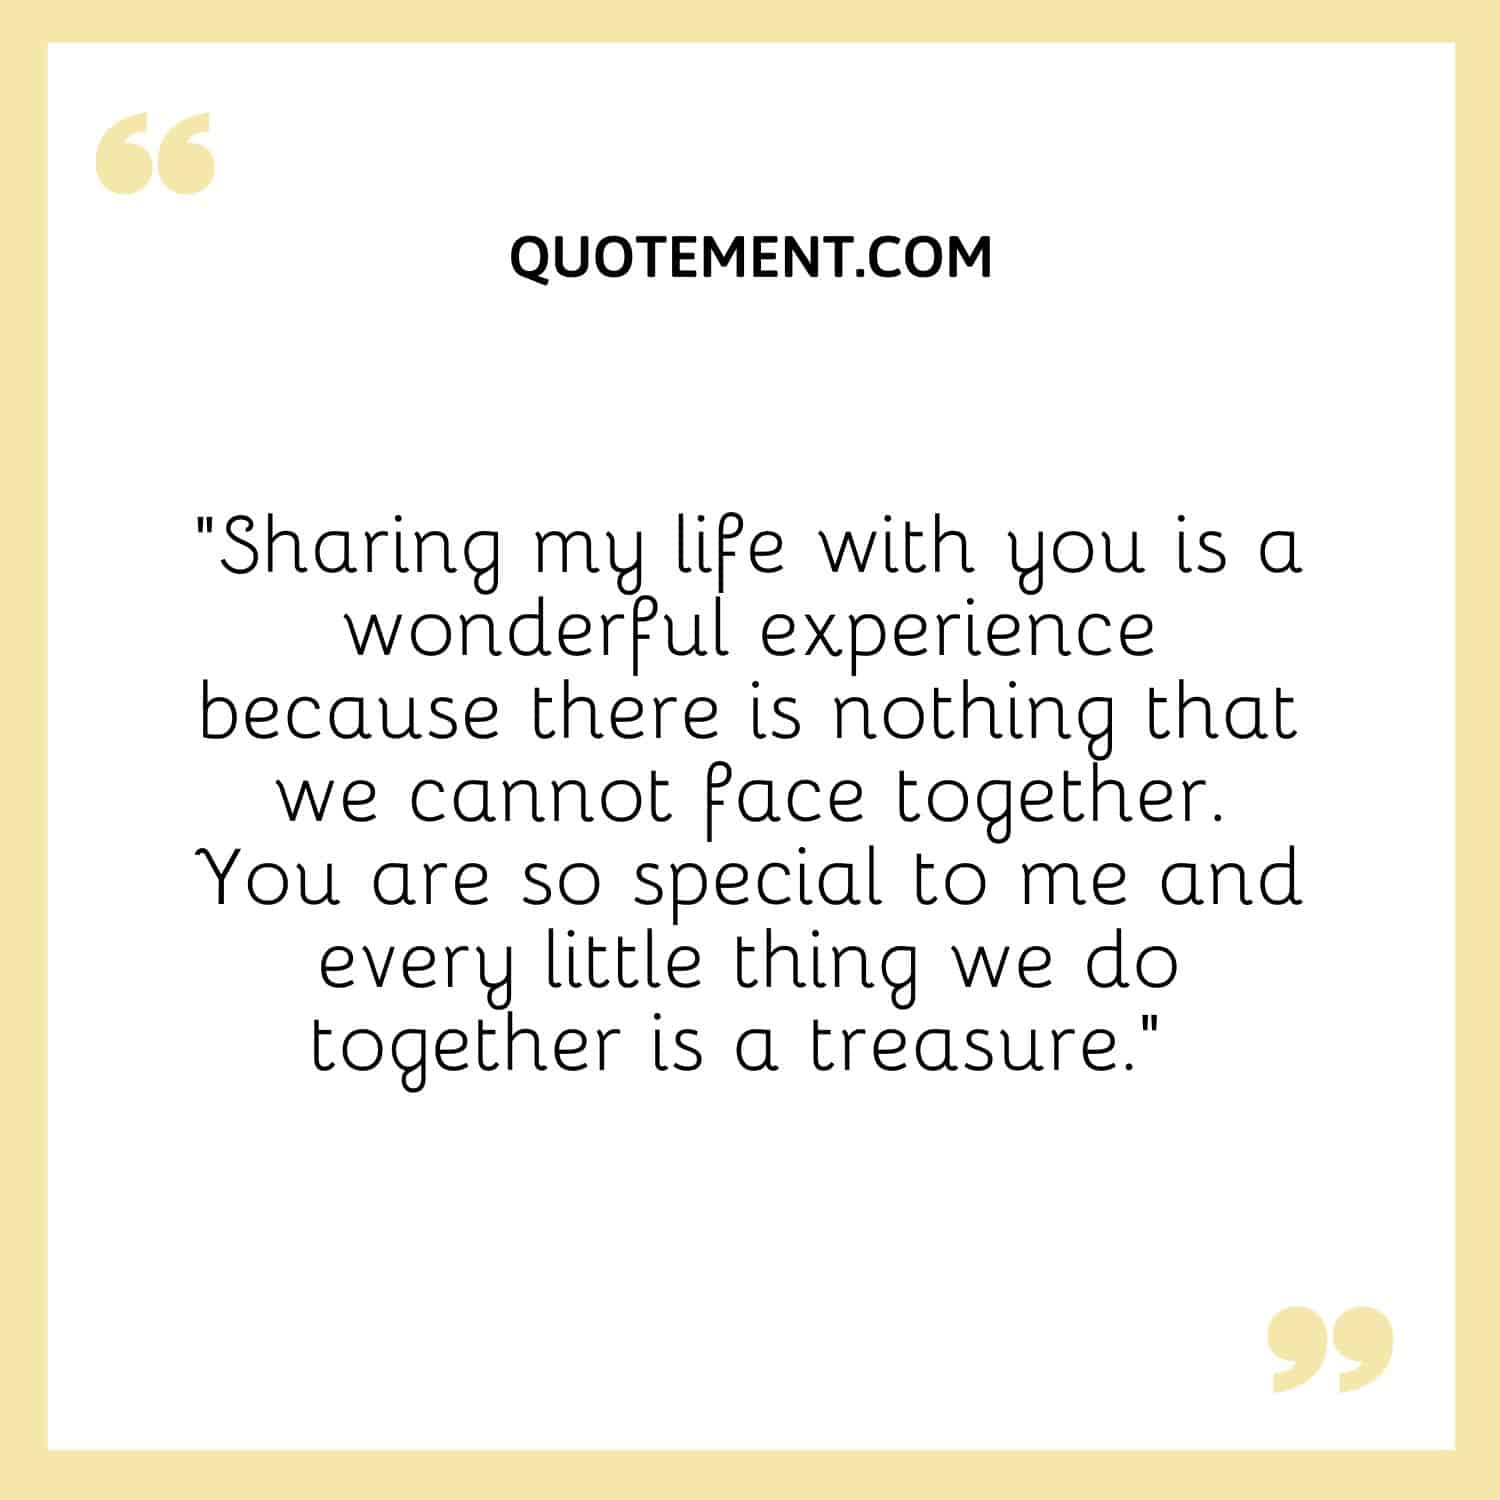 Sharing my life with you is a wonderful experience